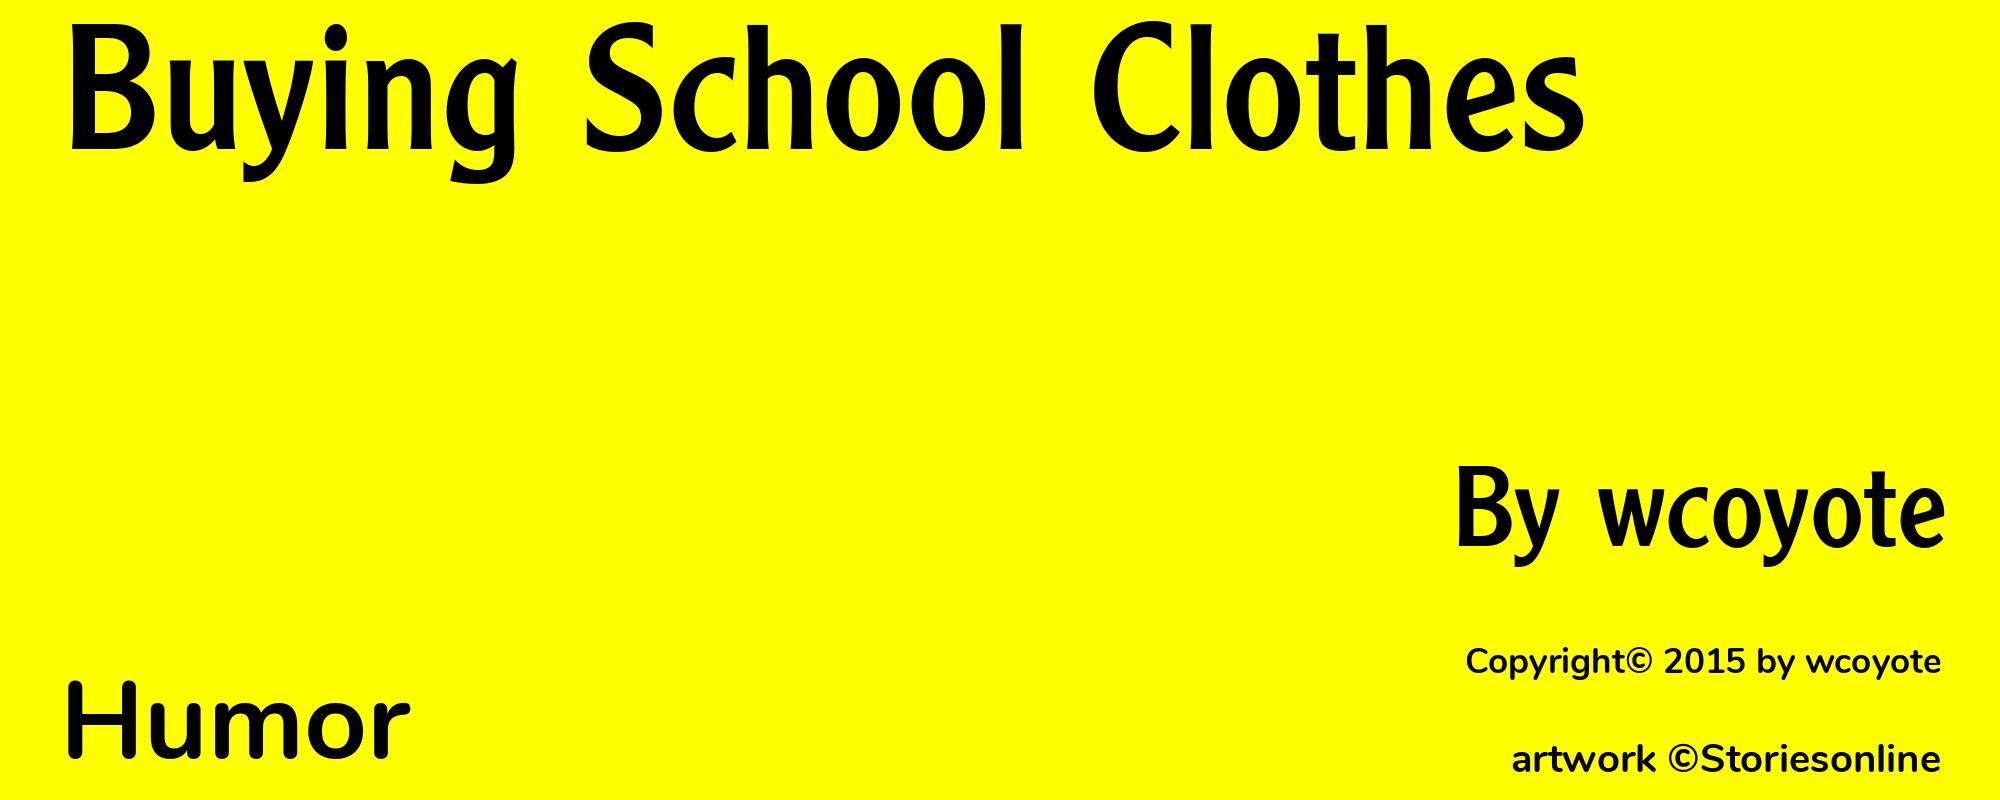 Buying School Clothes - Cover